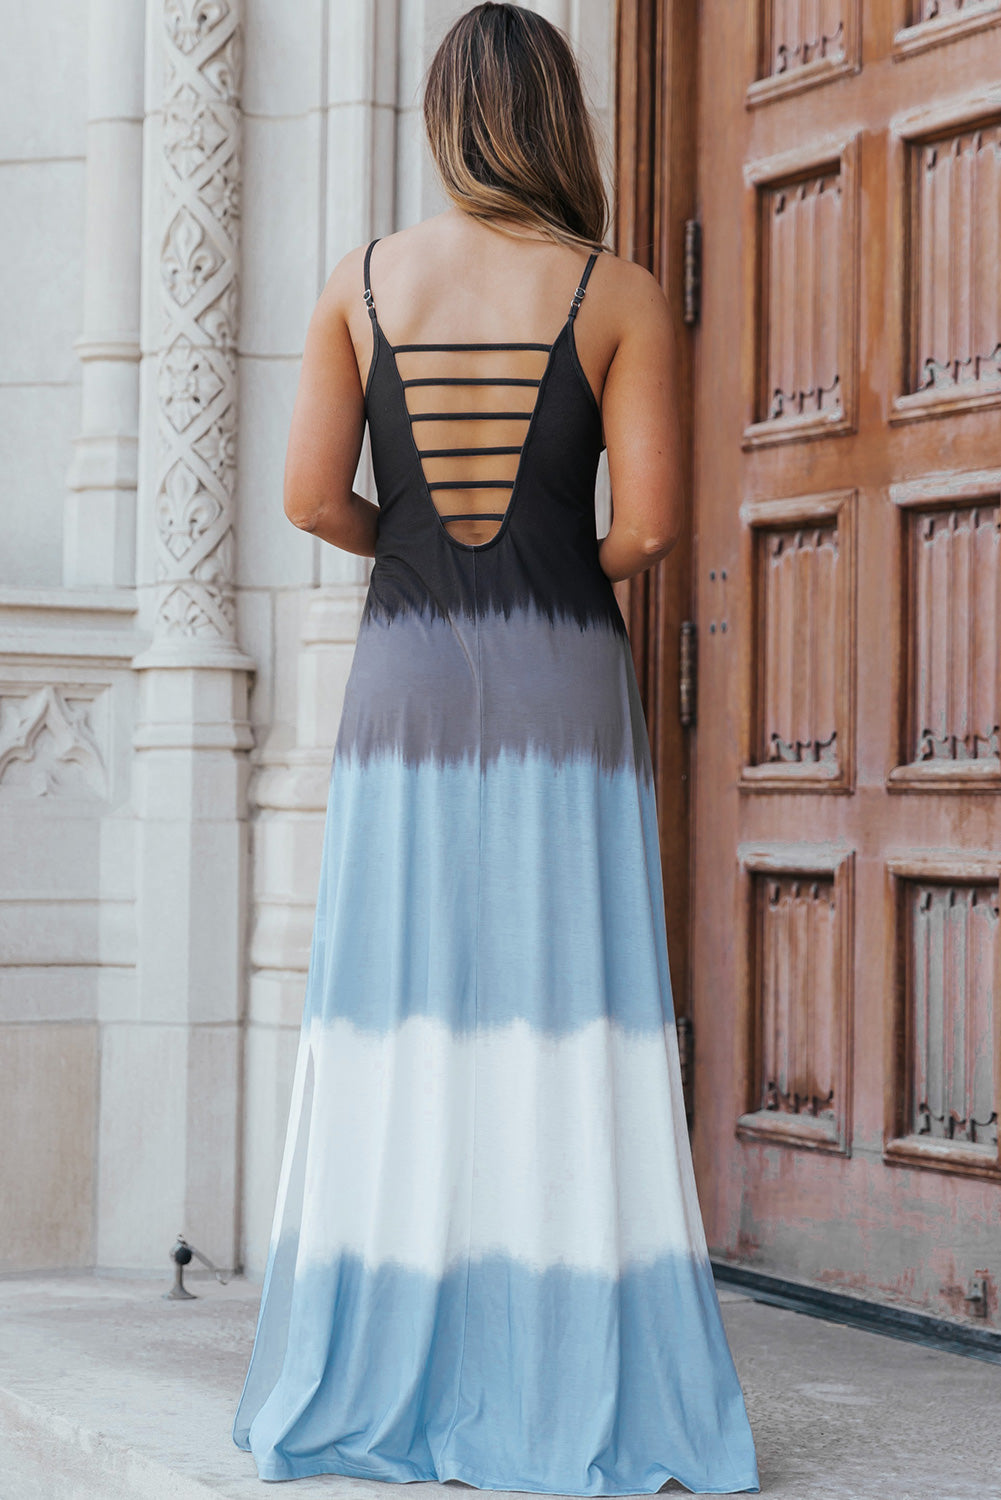 Stylish woman wearing a color block scoop neck maxi dress with a side slit, featuring blue and black tones.